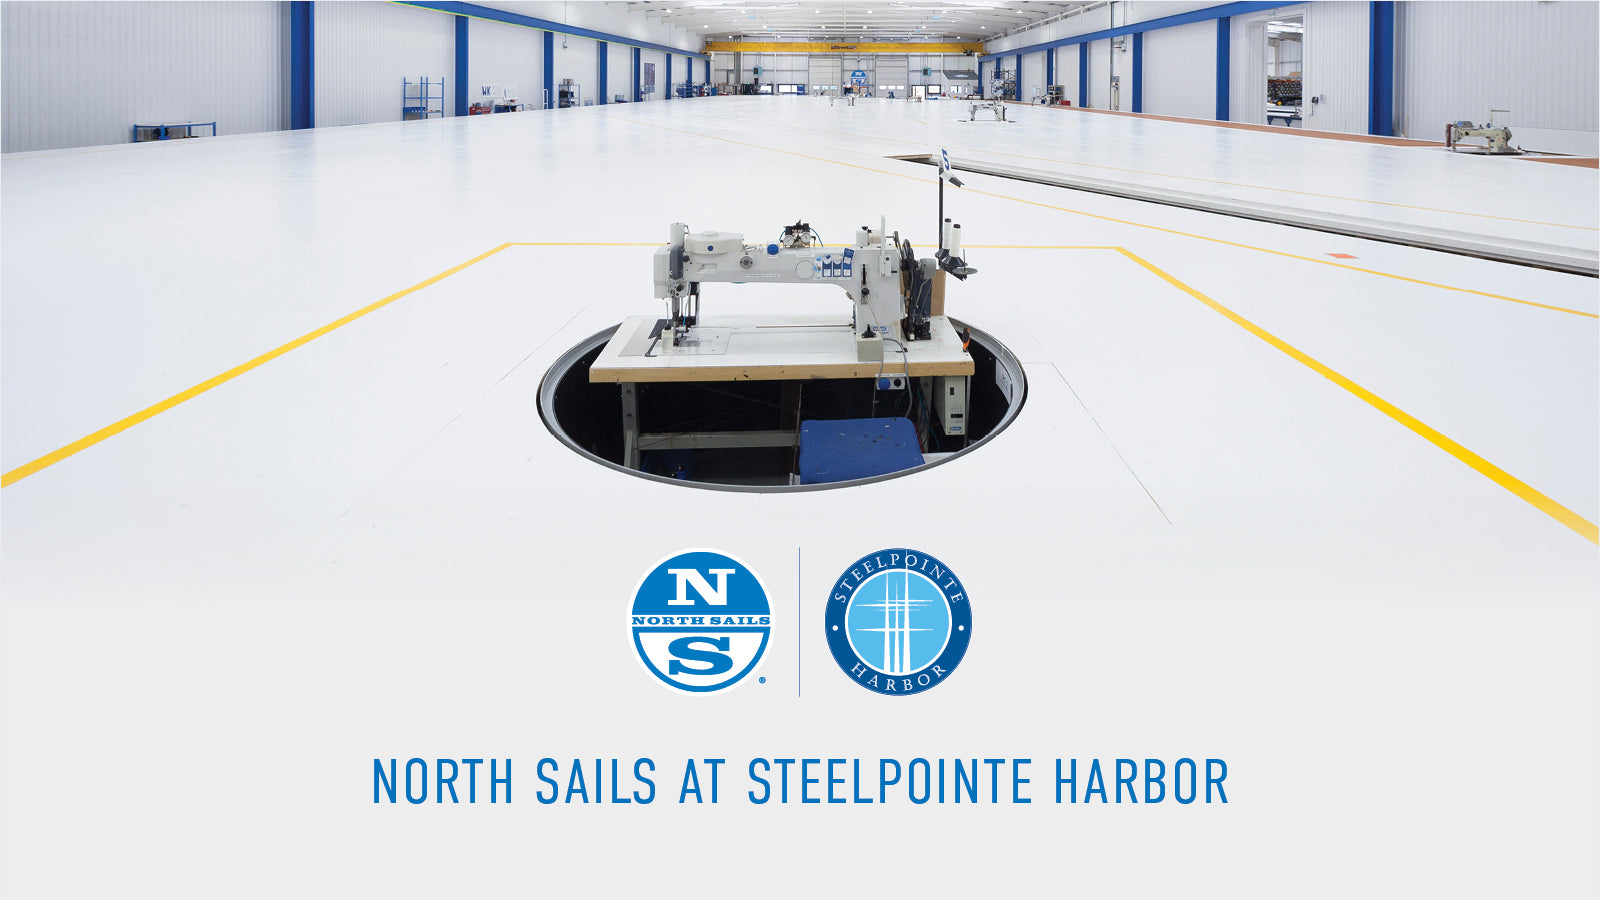 NORTH SAILS EXPANDS EAST COAST WATERFRONT PRESENCE